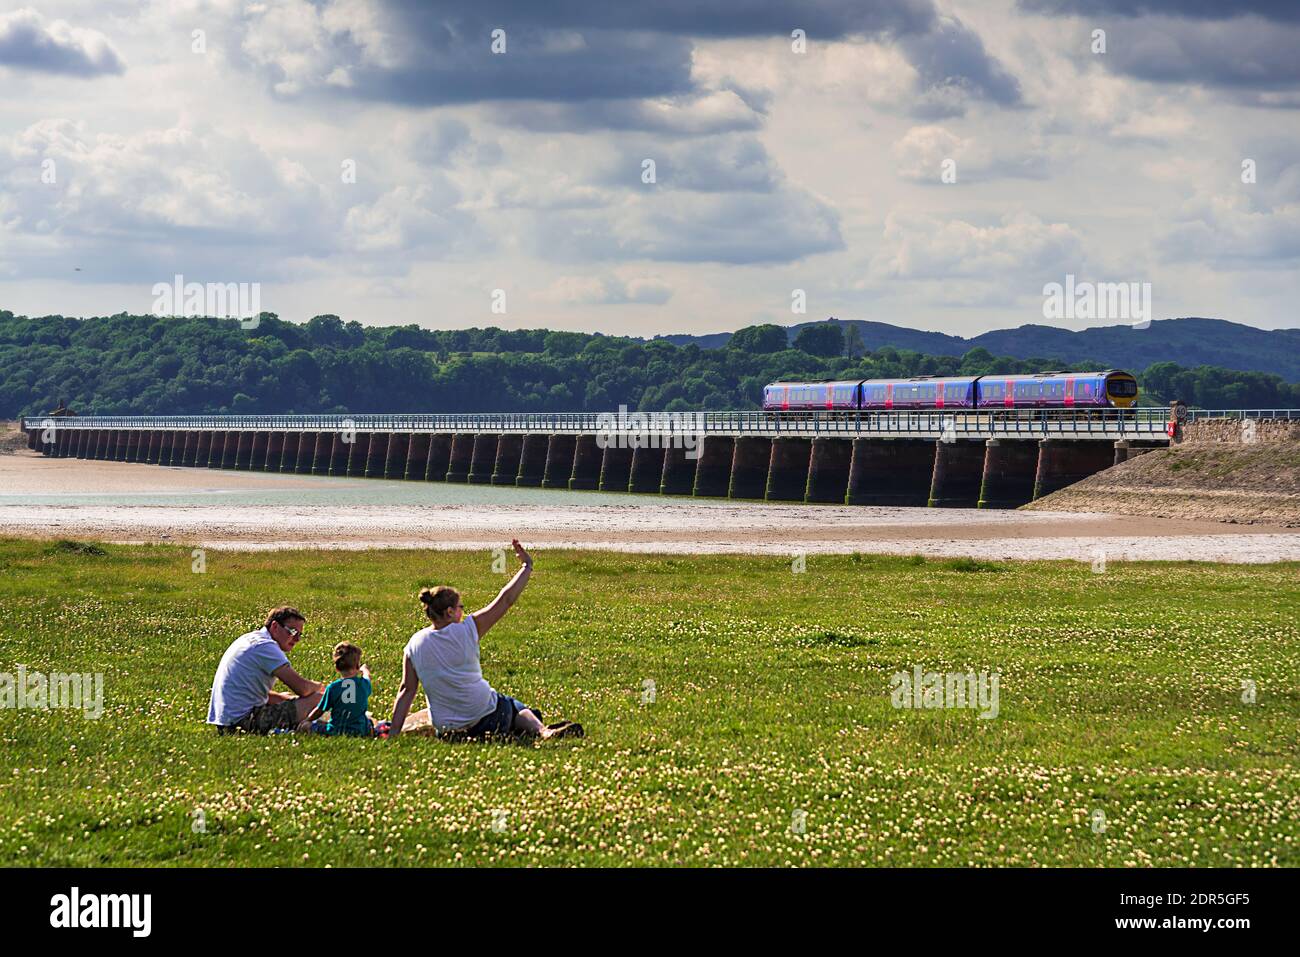 A train crossing the Arnside viaduct over the river Kent in Cumbria North West England. *** Local Caption *** Carousel submitted June 2014 Stock Photo